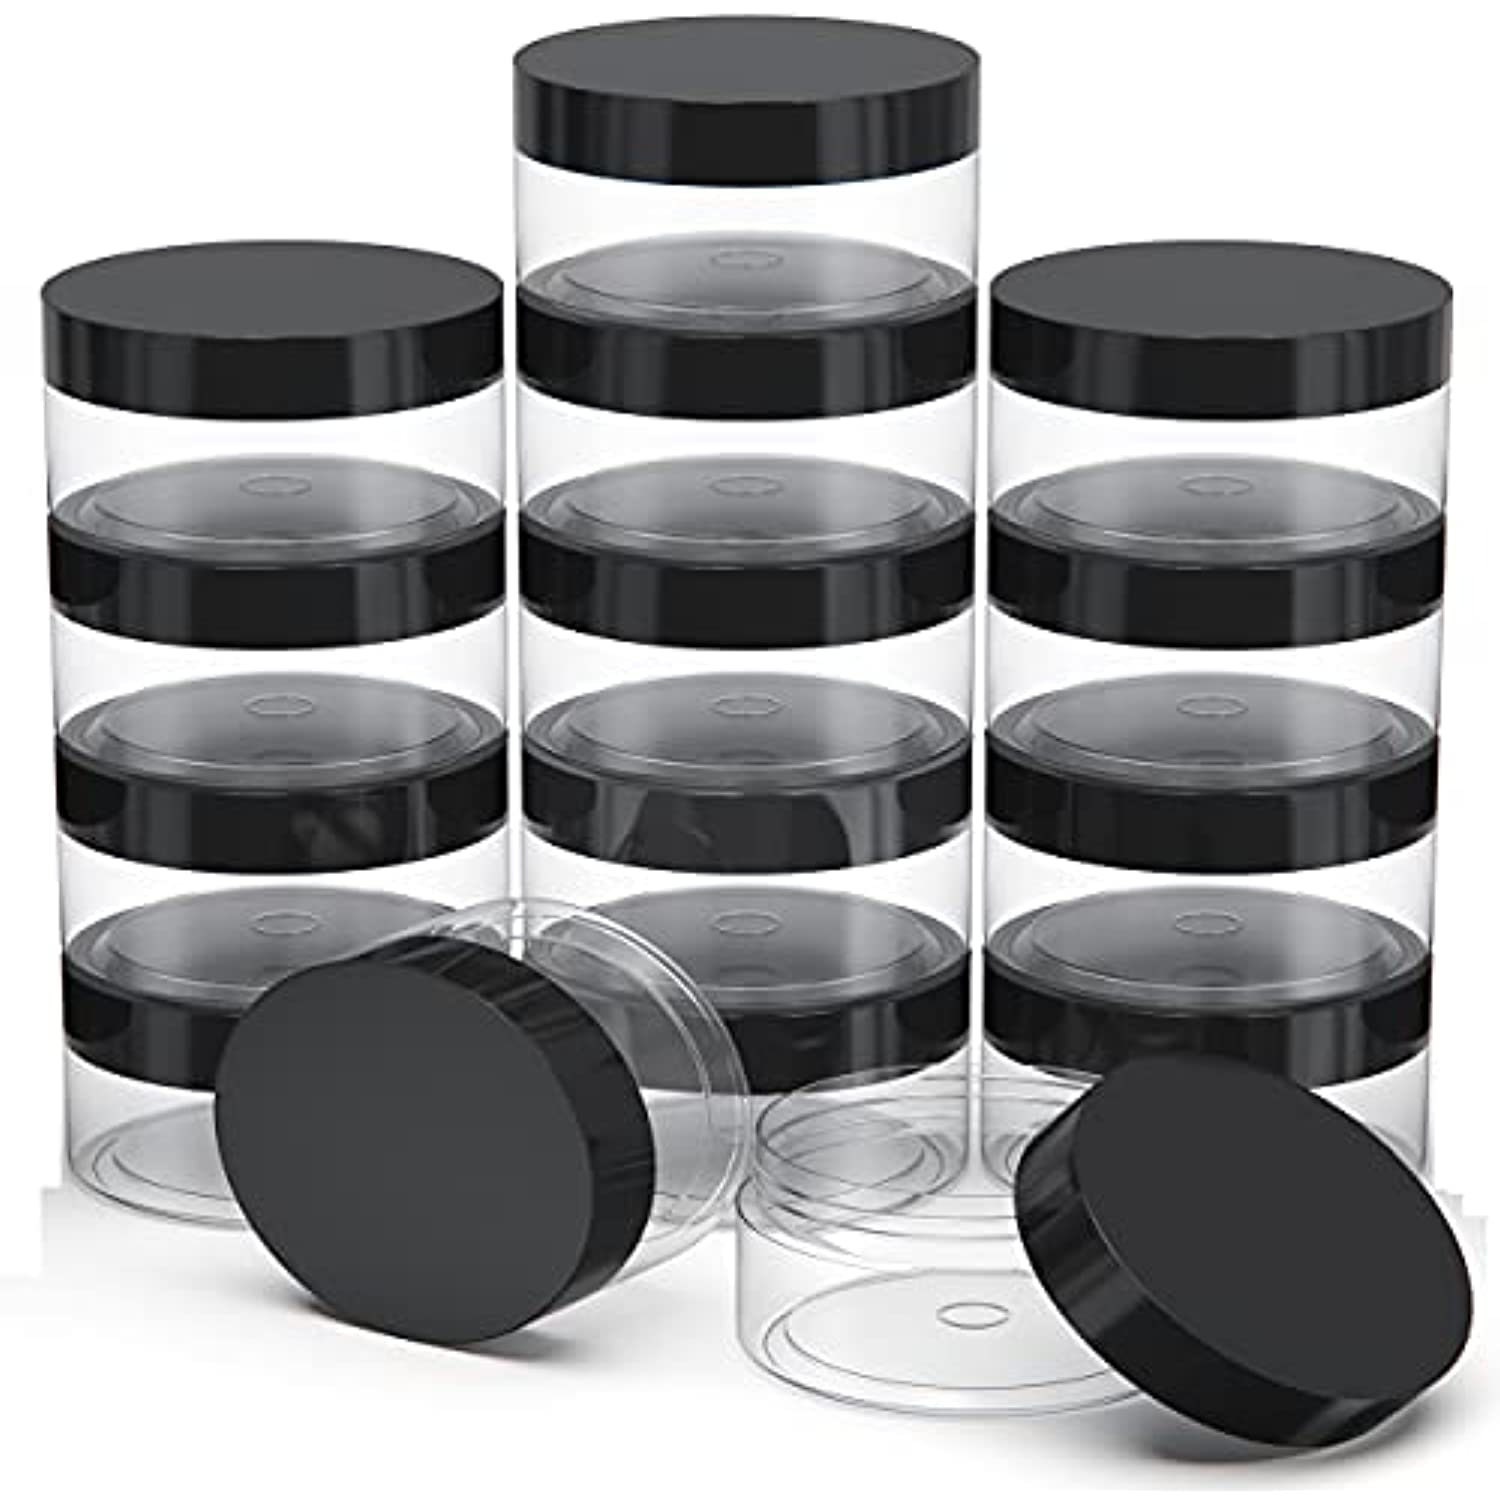 Case of 24-4 Oz. Shallow Round Steel Tins W/lids. Case of 24. 